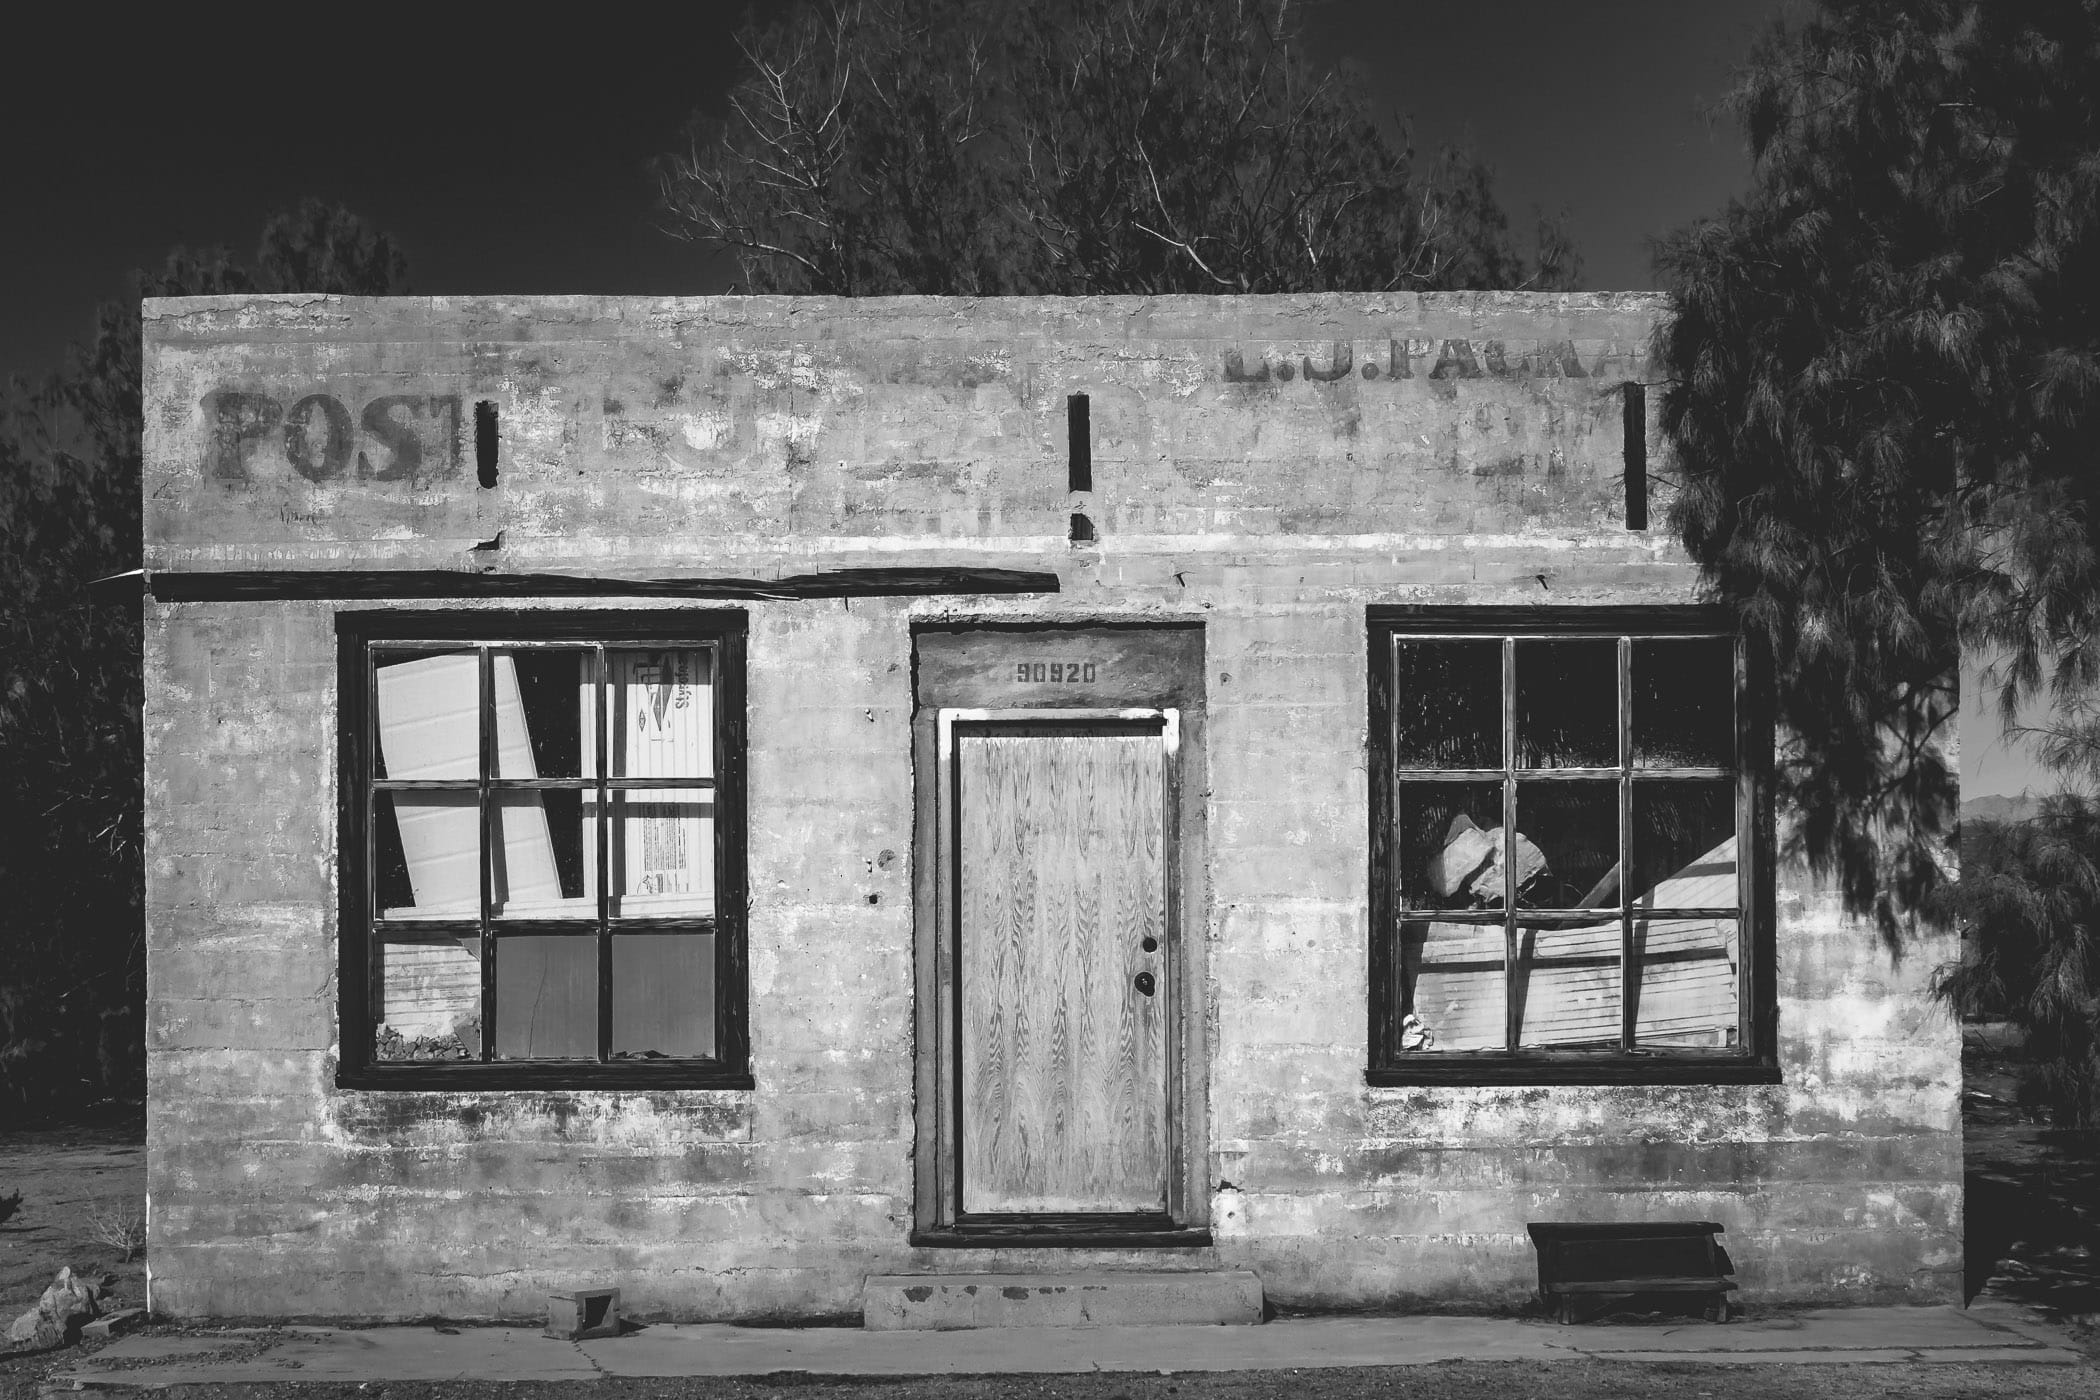 The long-abandoned post office in the California ghost town of Kelso in the Mojave National Preserve.